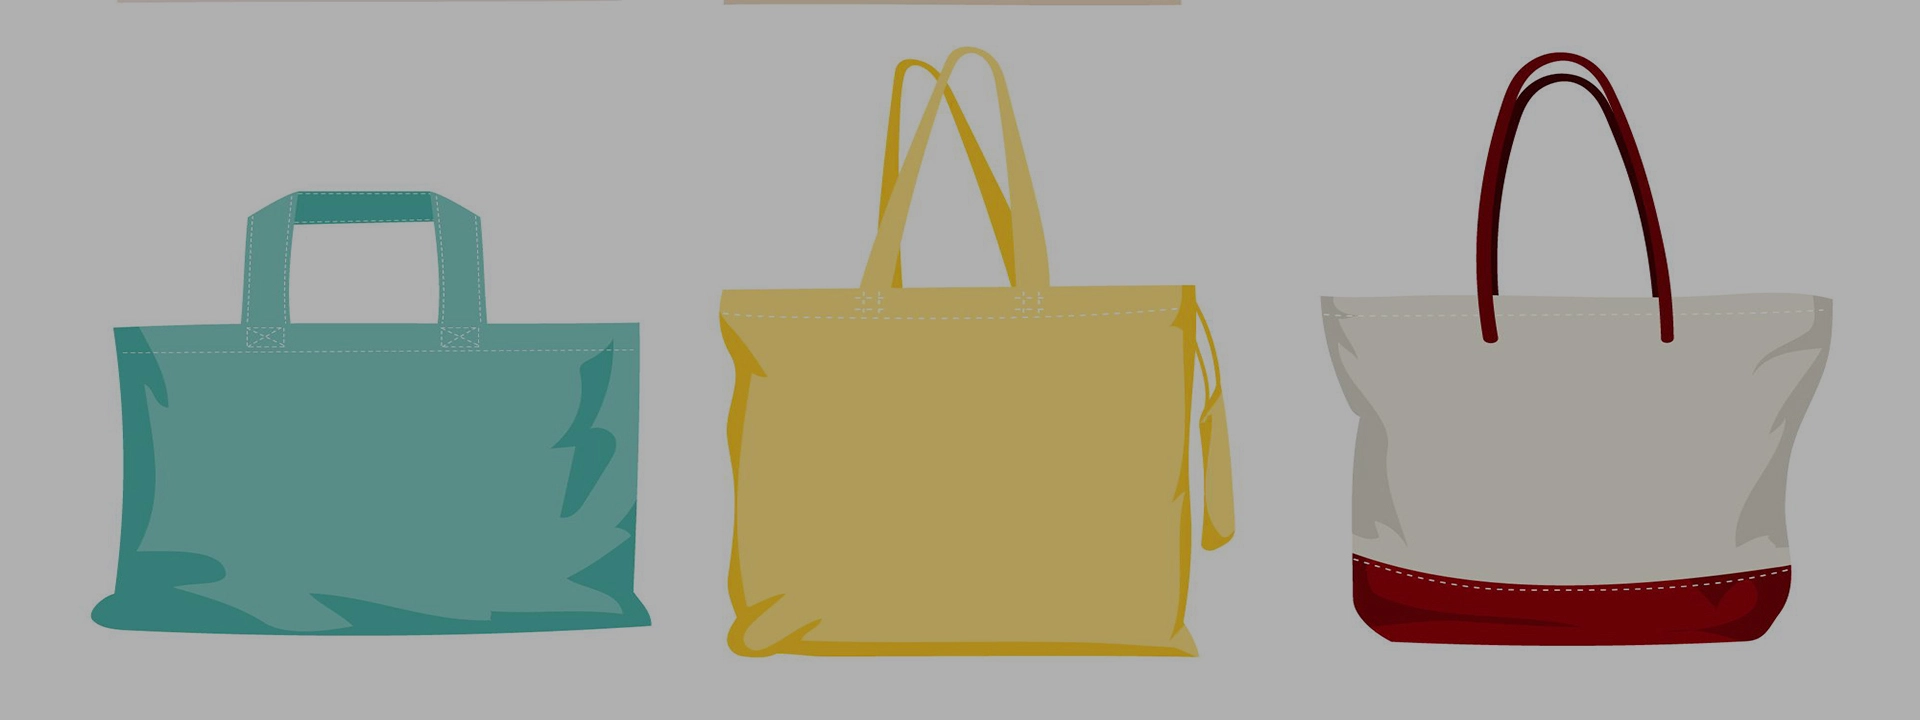 User Experience with Woven Tote Bags